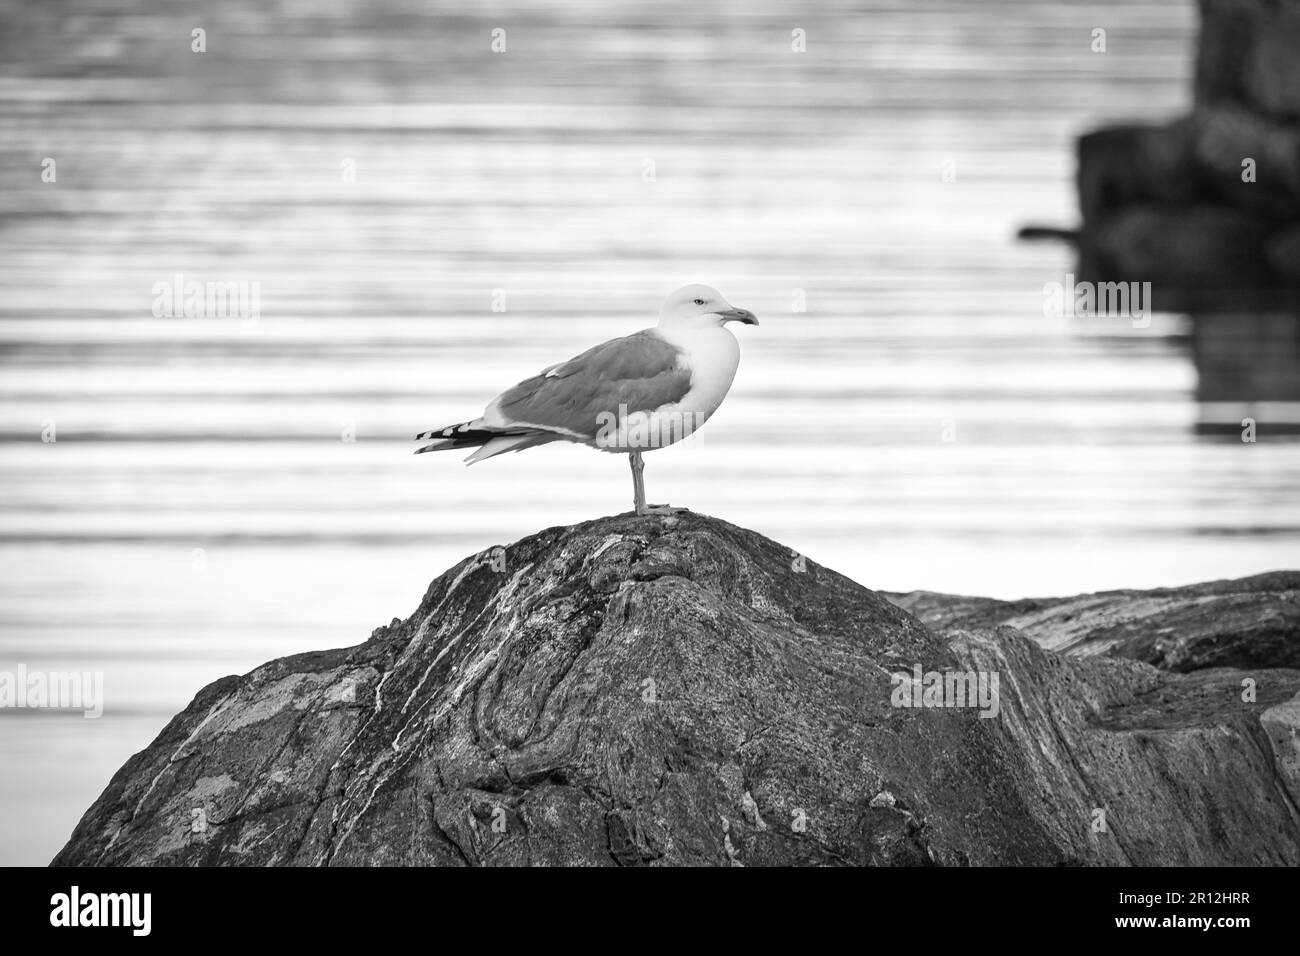 seagull standing on a rock by the fjord in Norway. Seabird in Scandinavia. Landscape photo Stock Photo